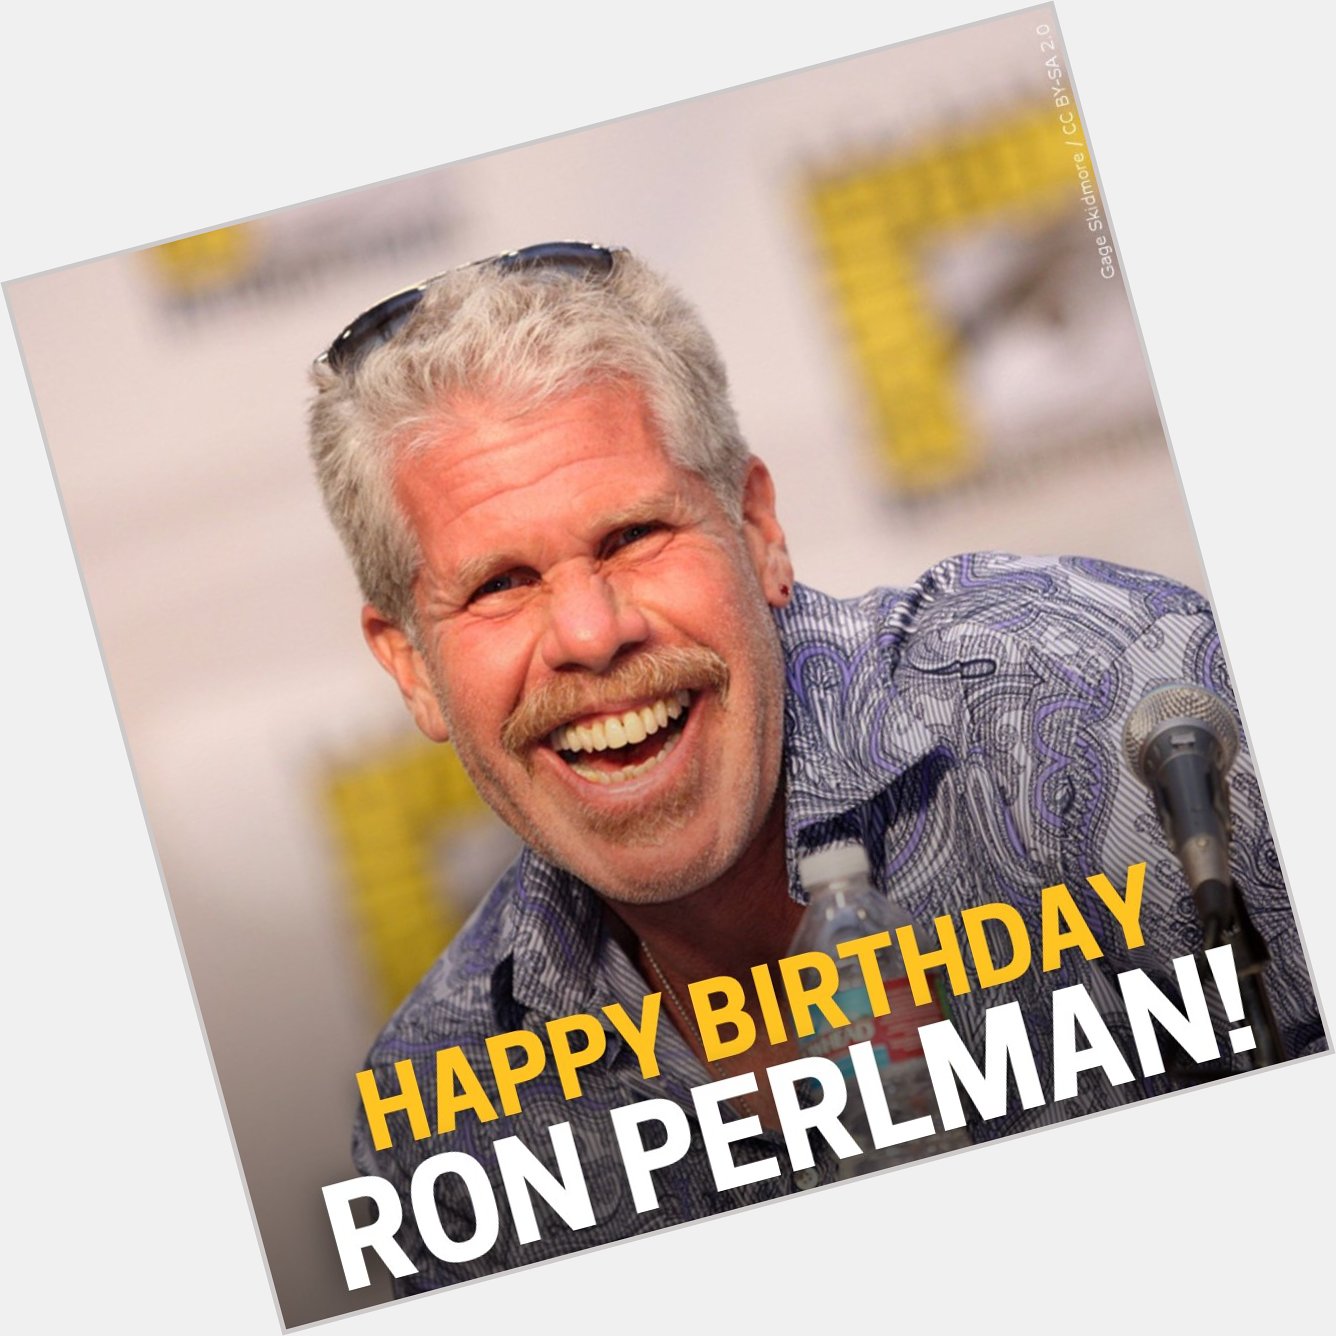 Celebrating the one and only Ron Perlman - Happy Birthday!! 